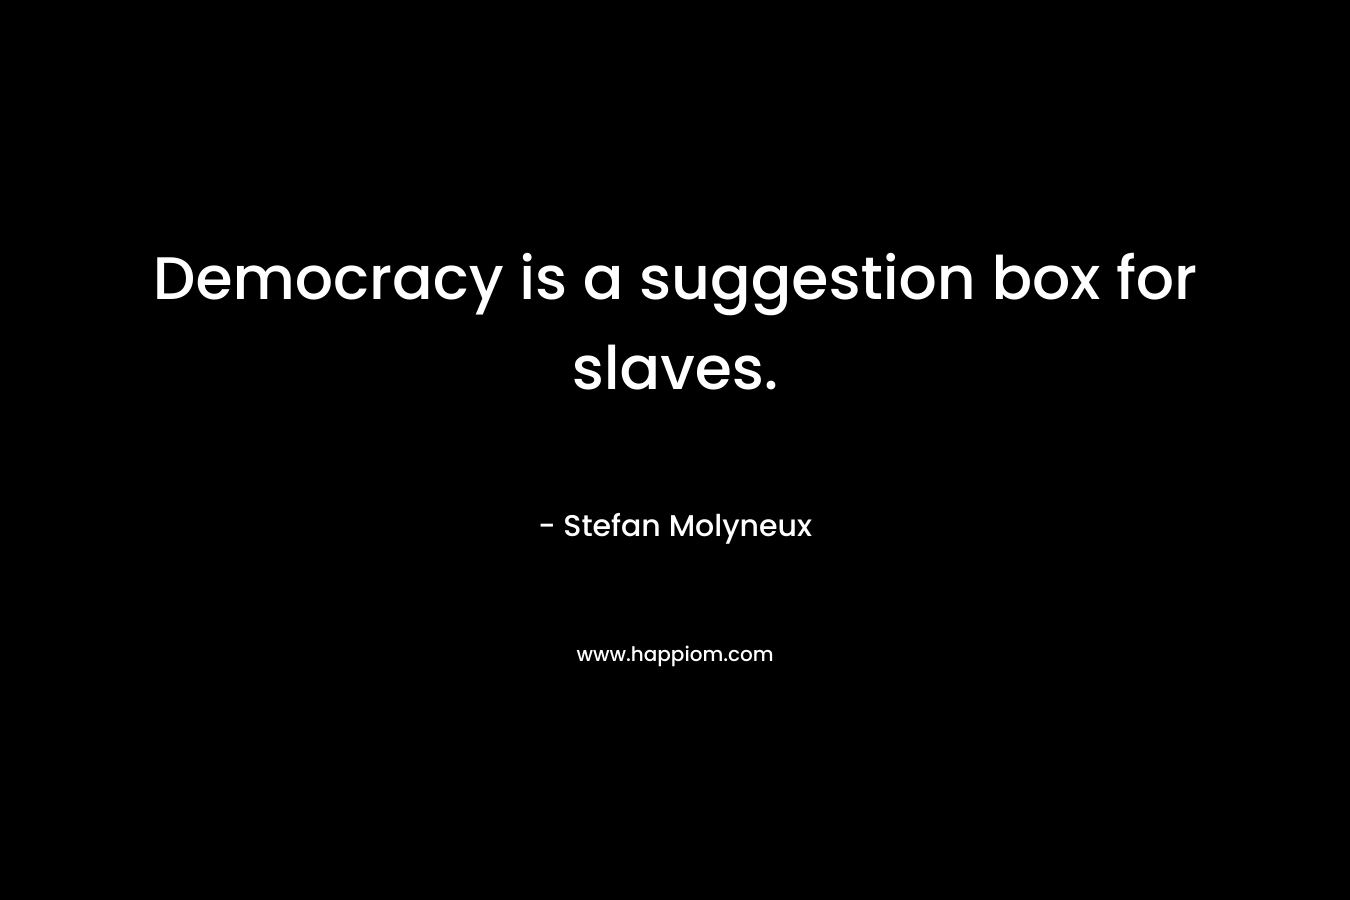 Democracy is a suggestion box for slaves. – Stefan Molyneux